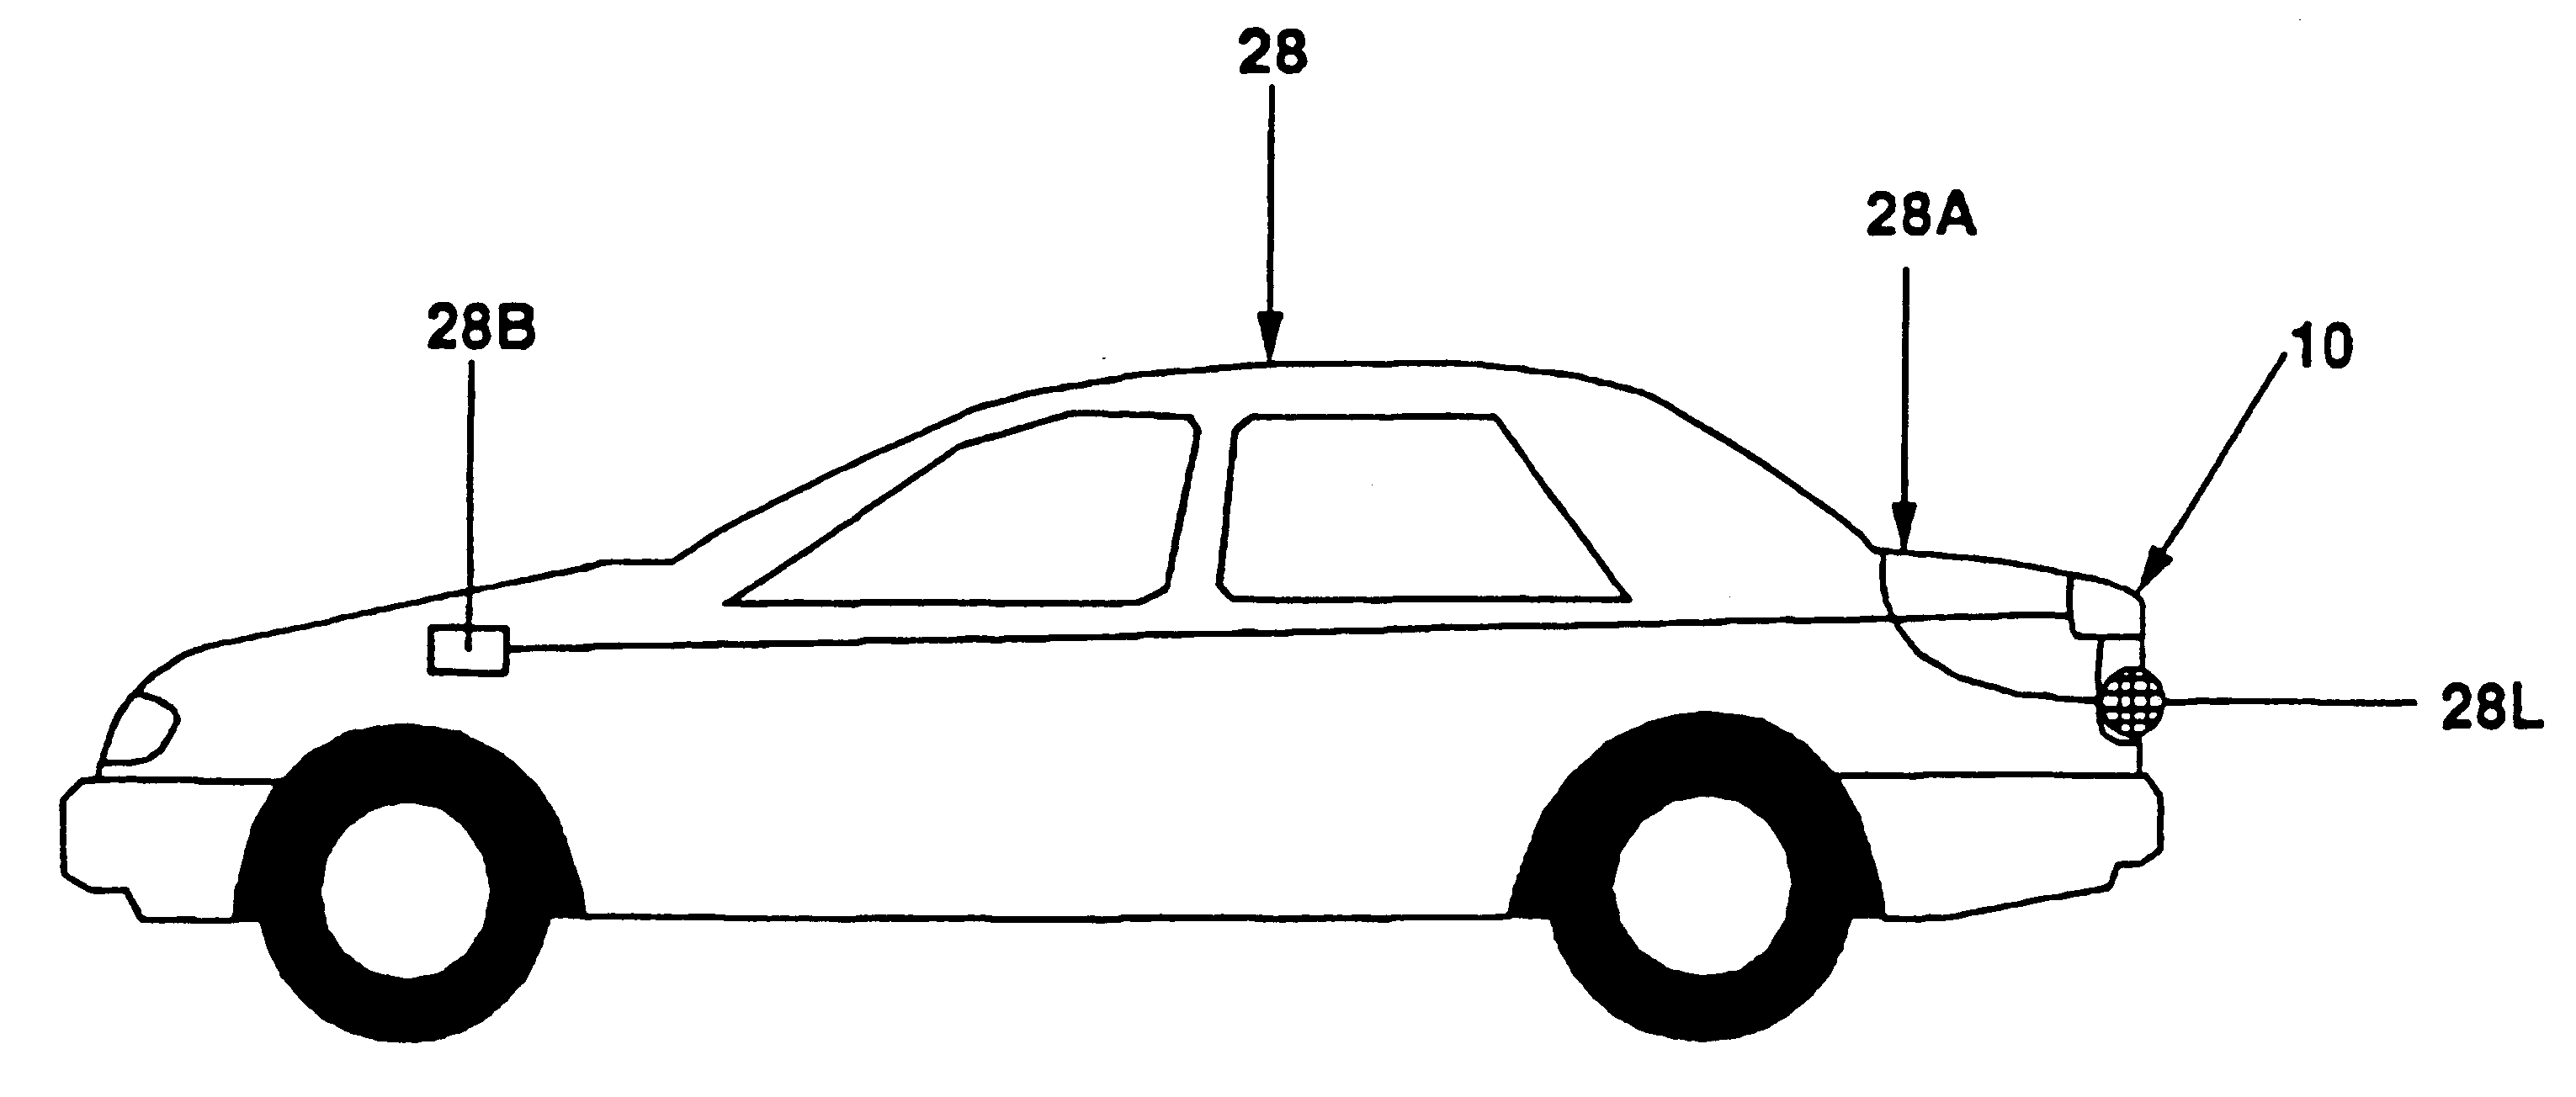 Apparatus for preventing confinement in a vehicle trunk